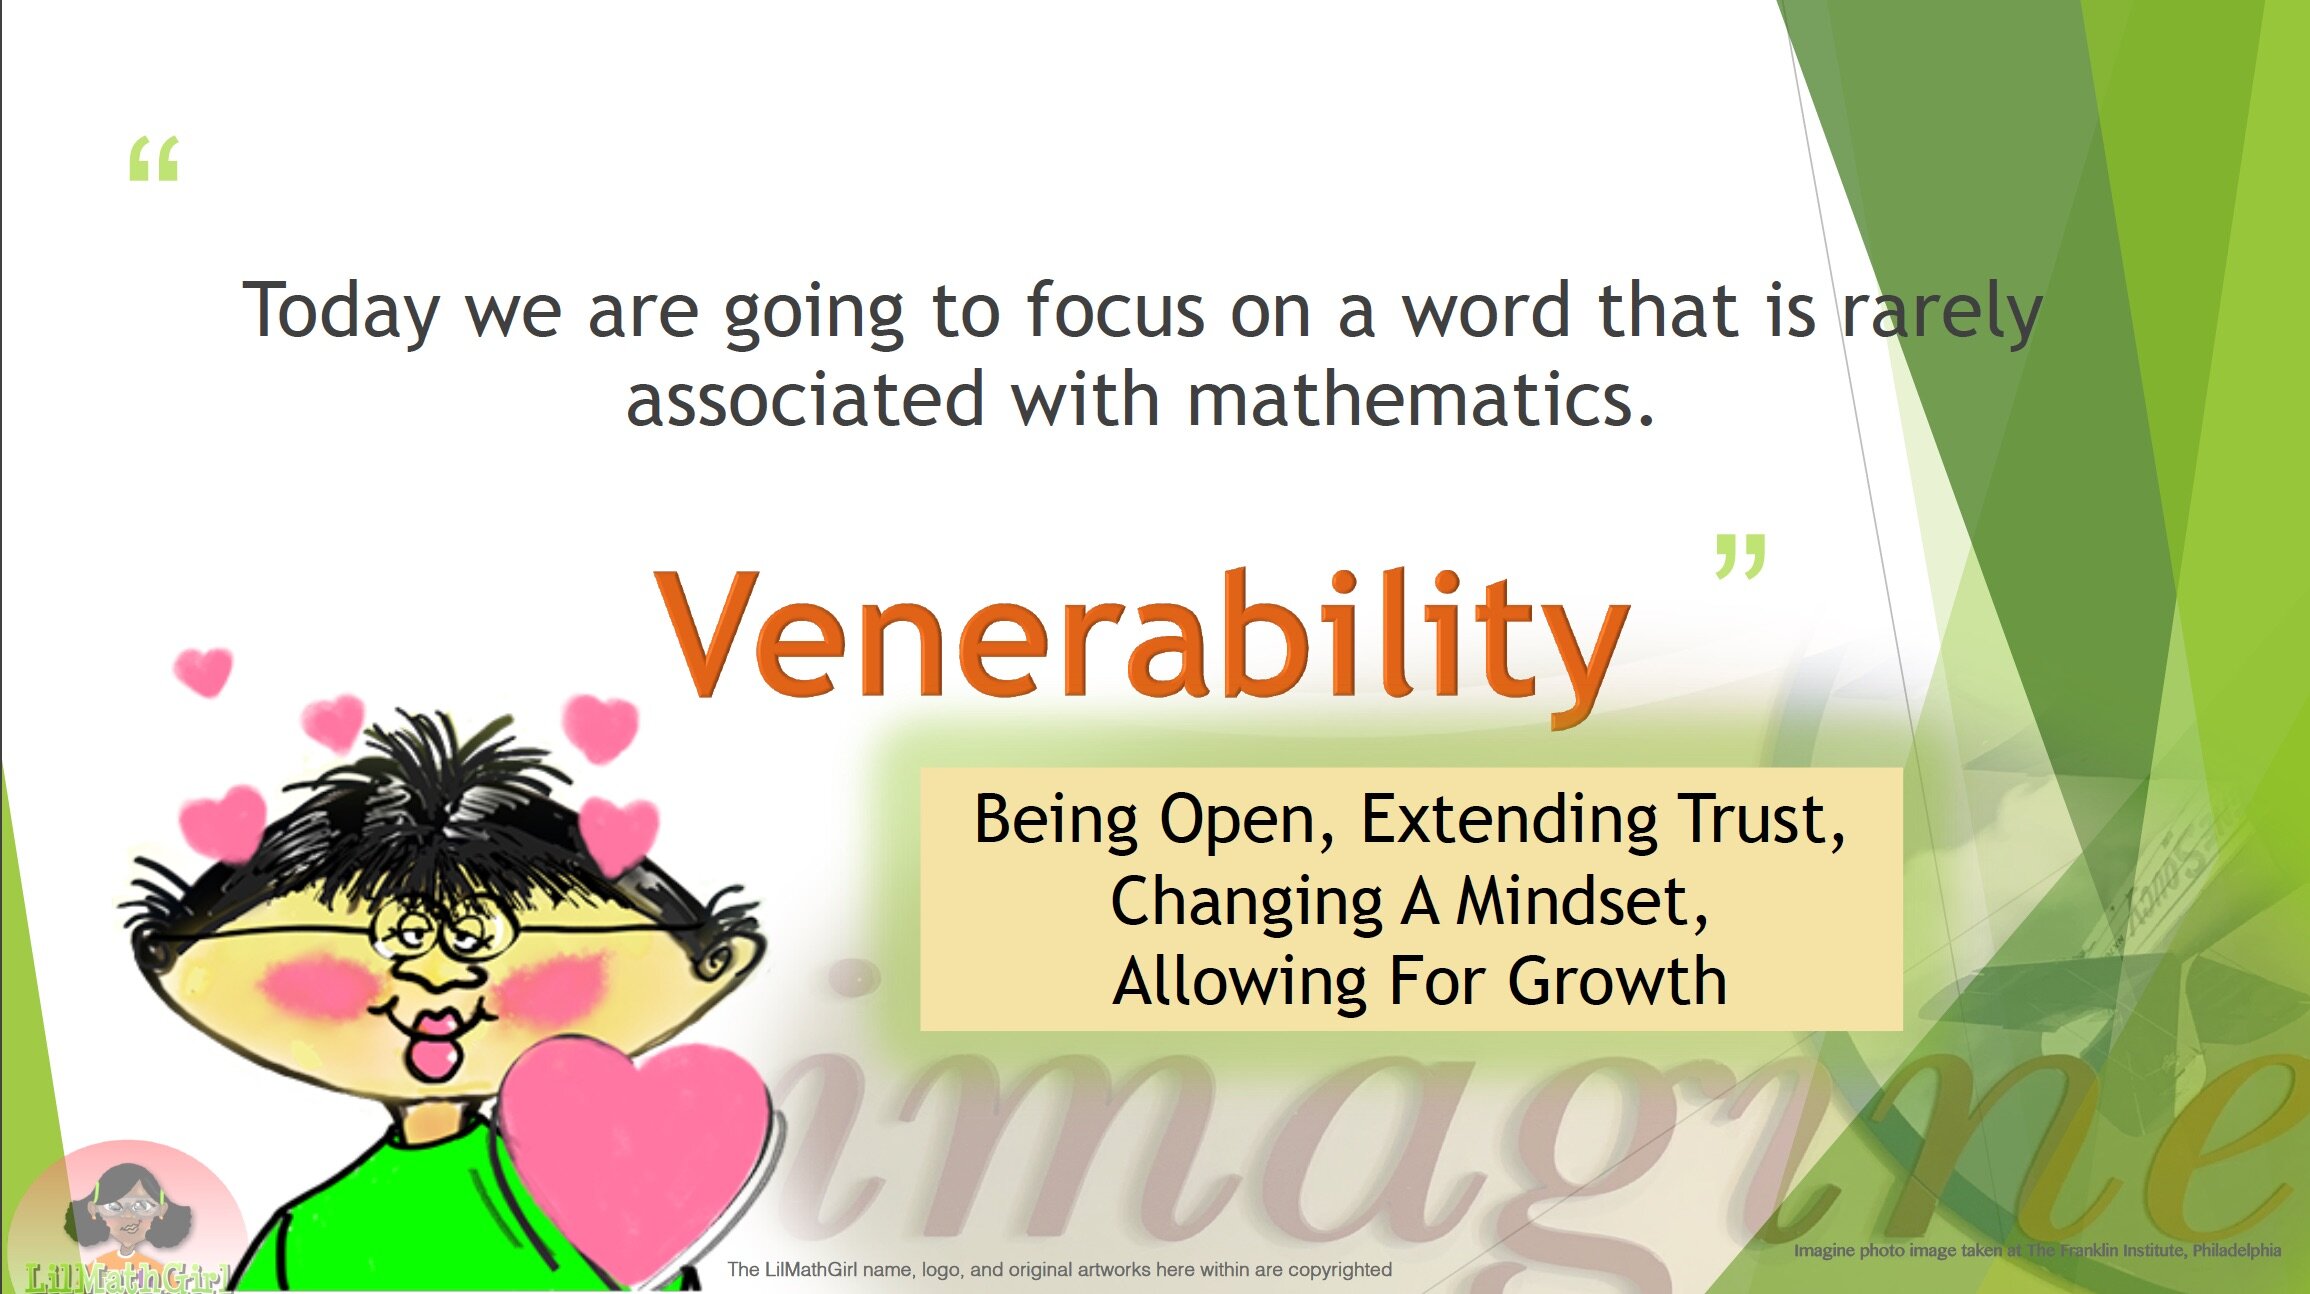 Banners_and_Alerts_and_Rethinking_The_Math_Game_CMC2019_pdf.jpg